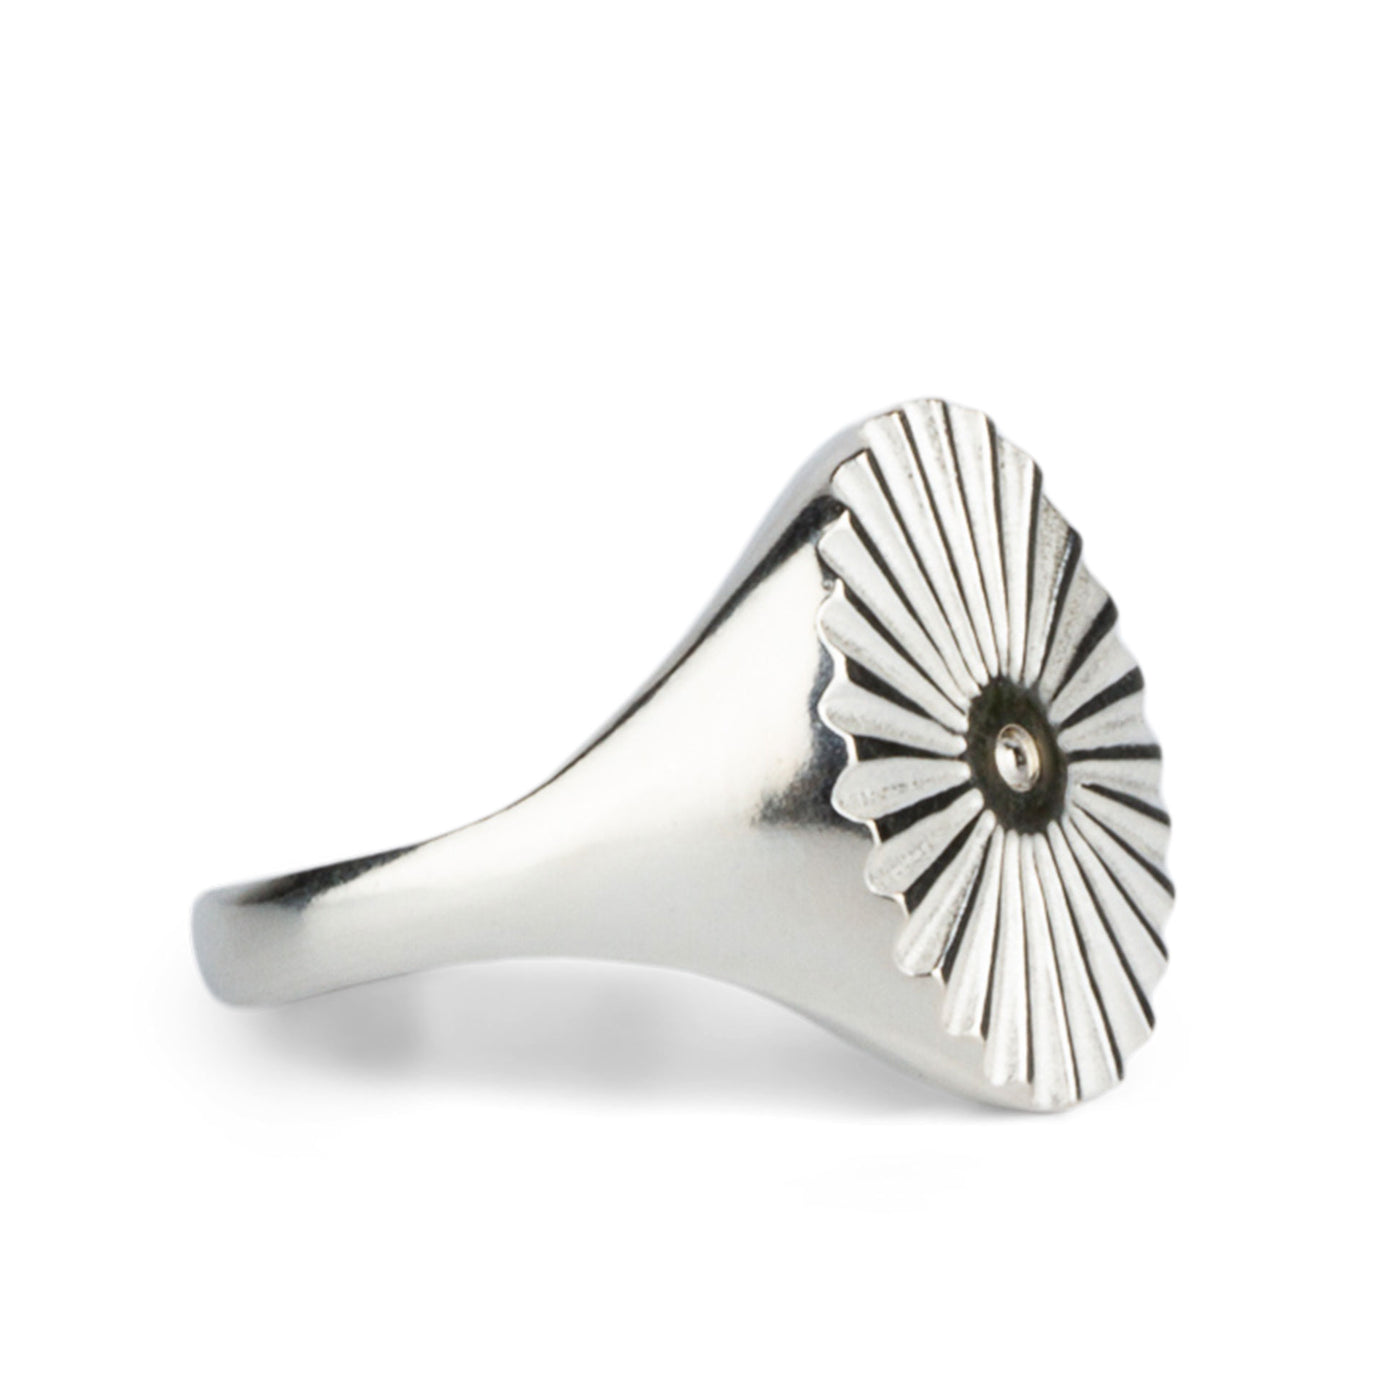 Alternate side view of Large silver oval signet ring with a carved sunburst pattern and a silver bead center on a white background